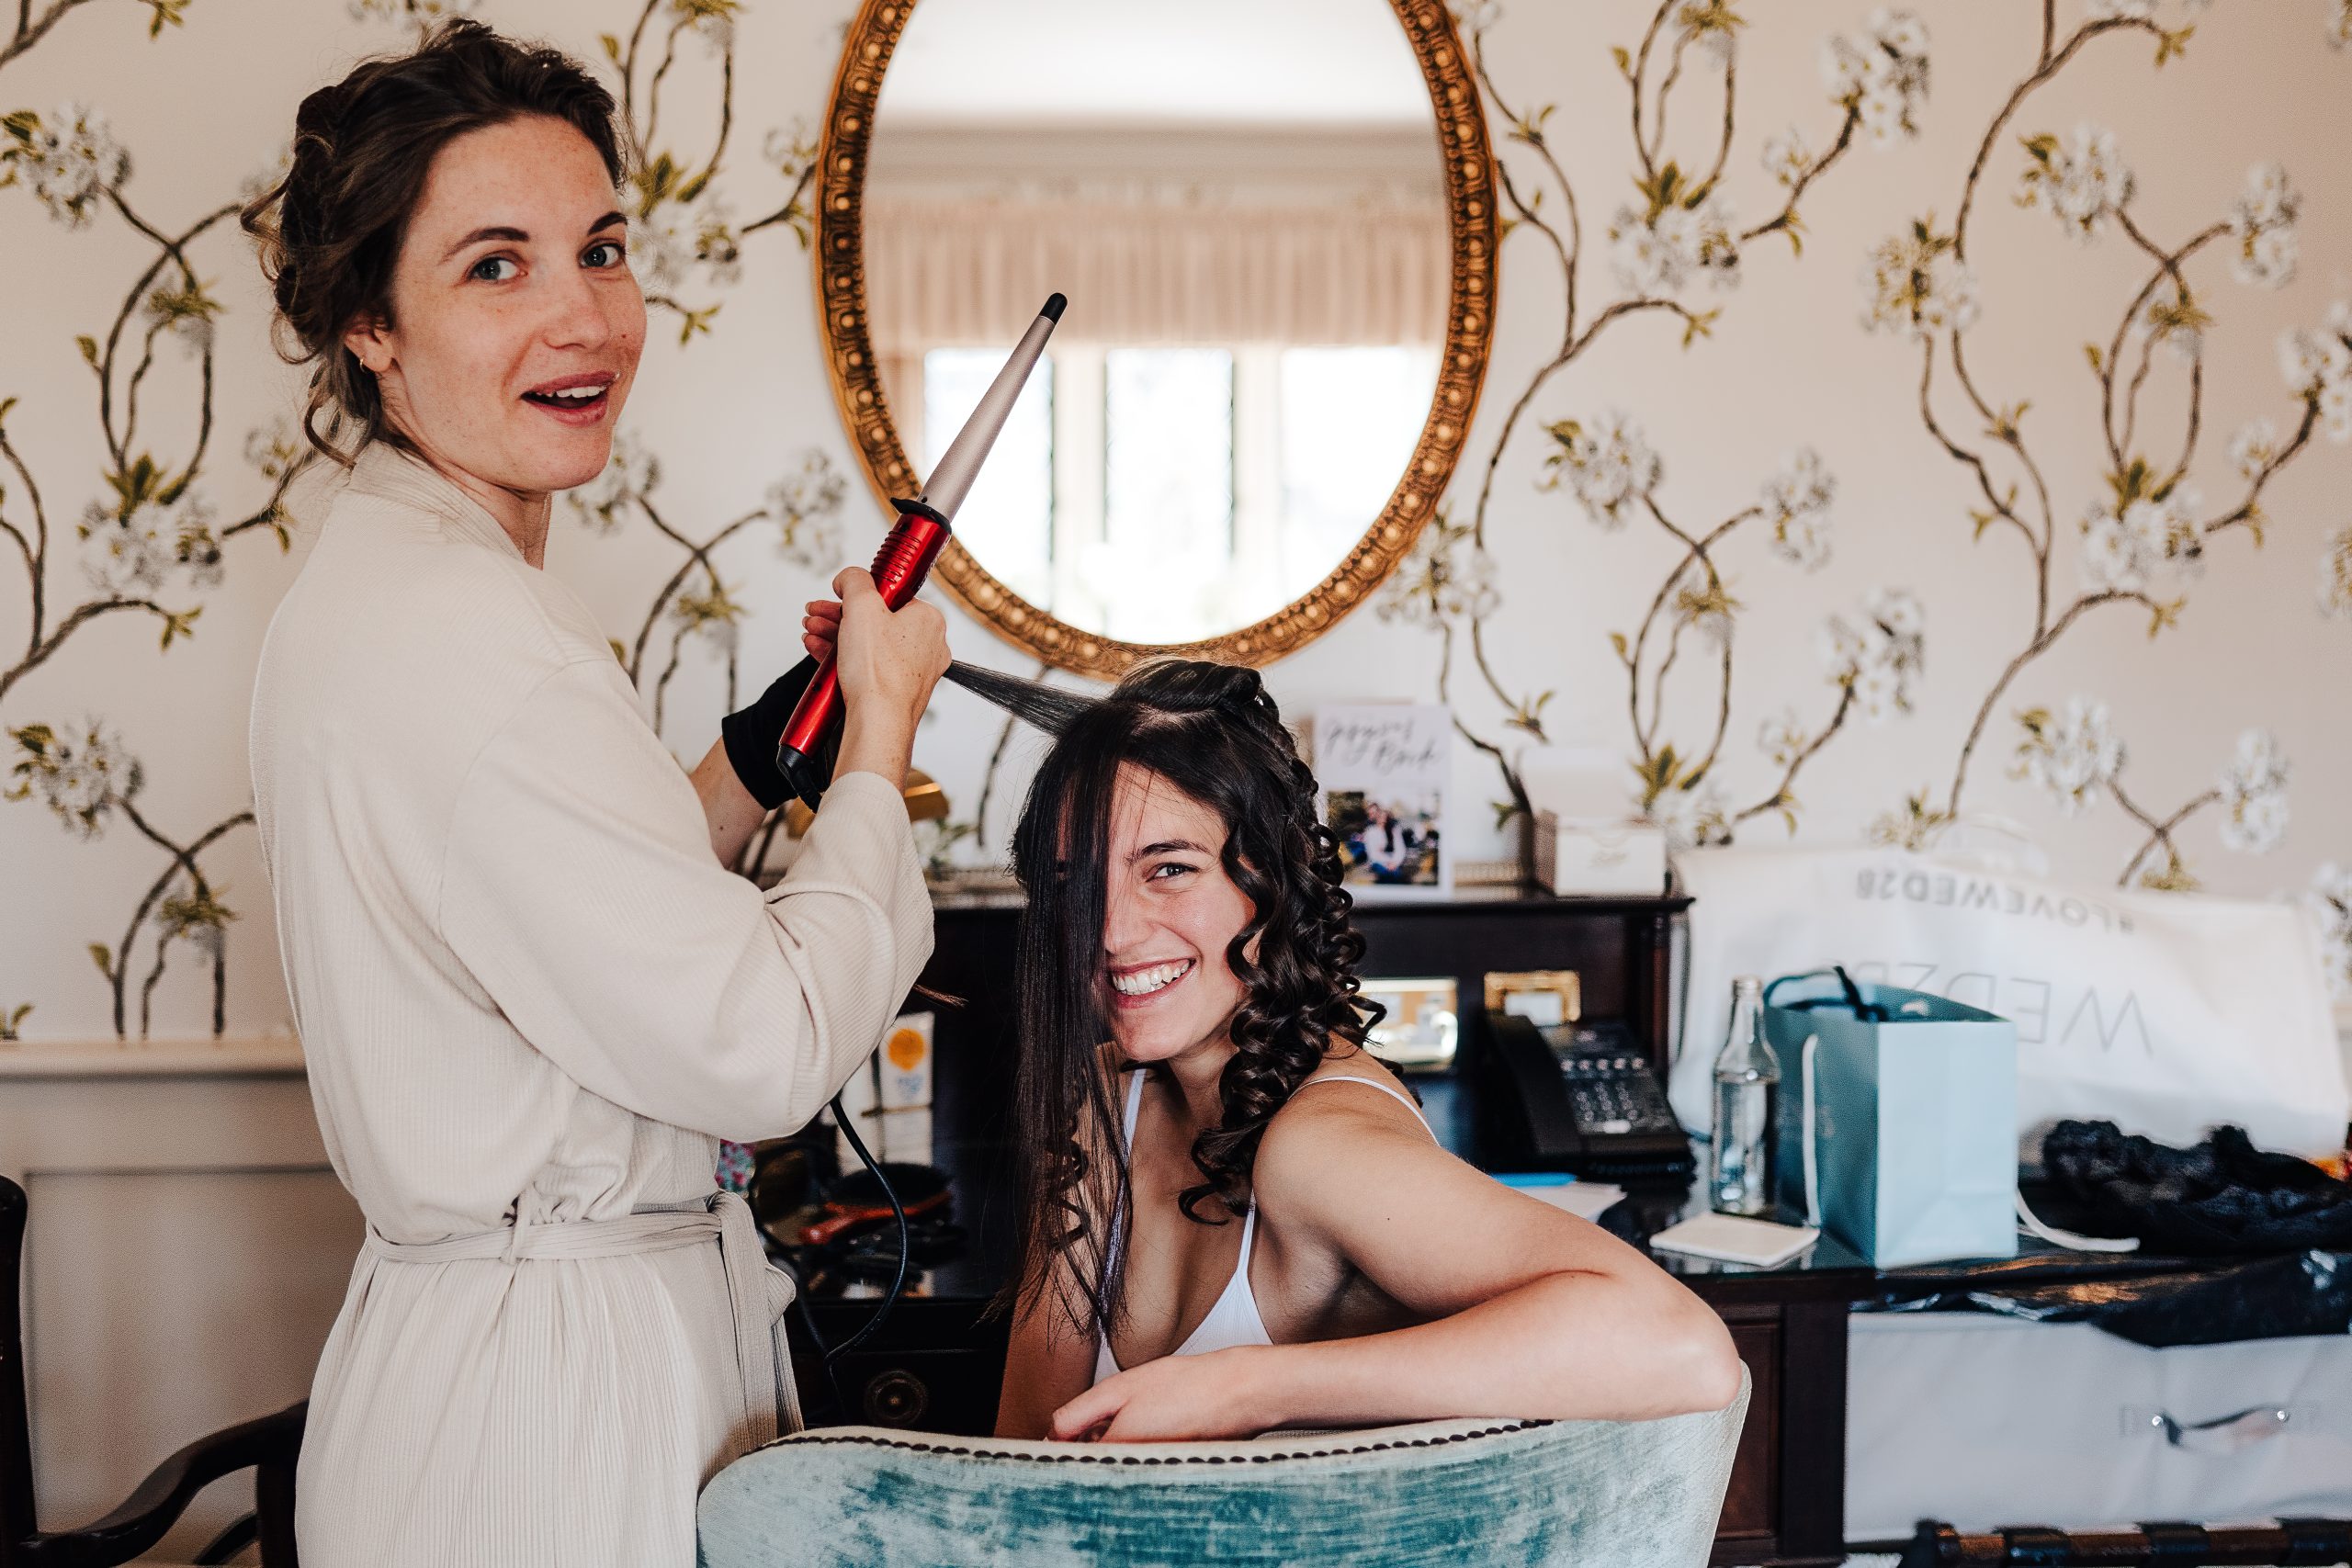 Bridal prep leads to a funny hair moment for Nina at her wedding venue Ellenborough Park Hotel